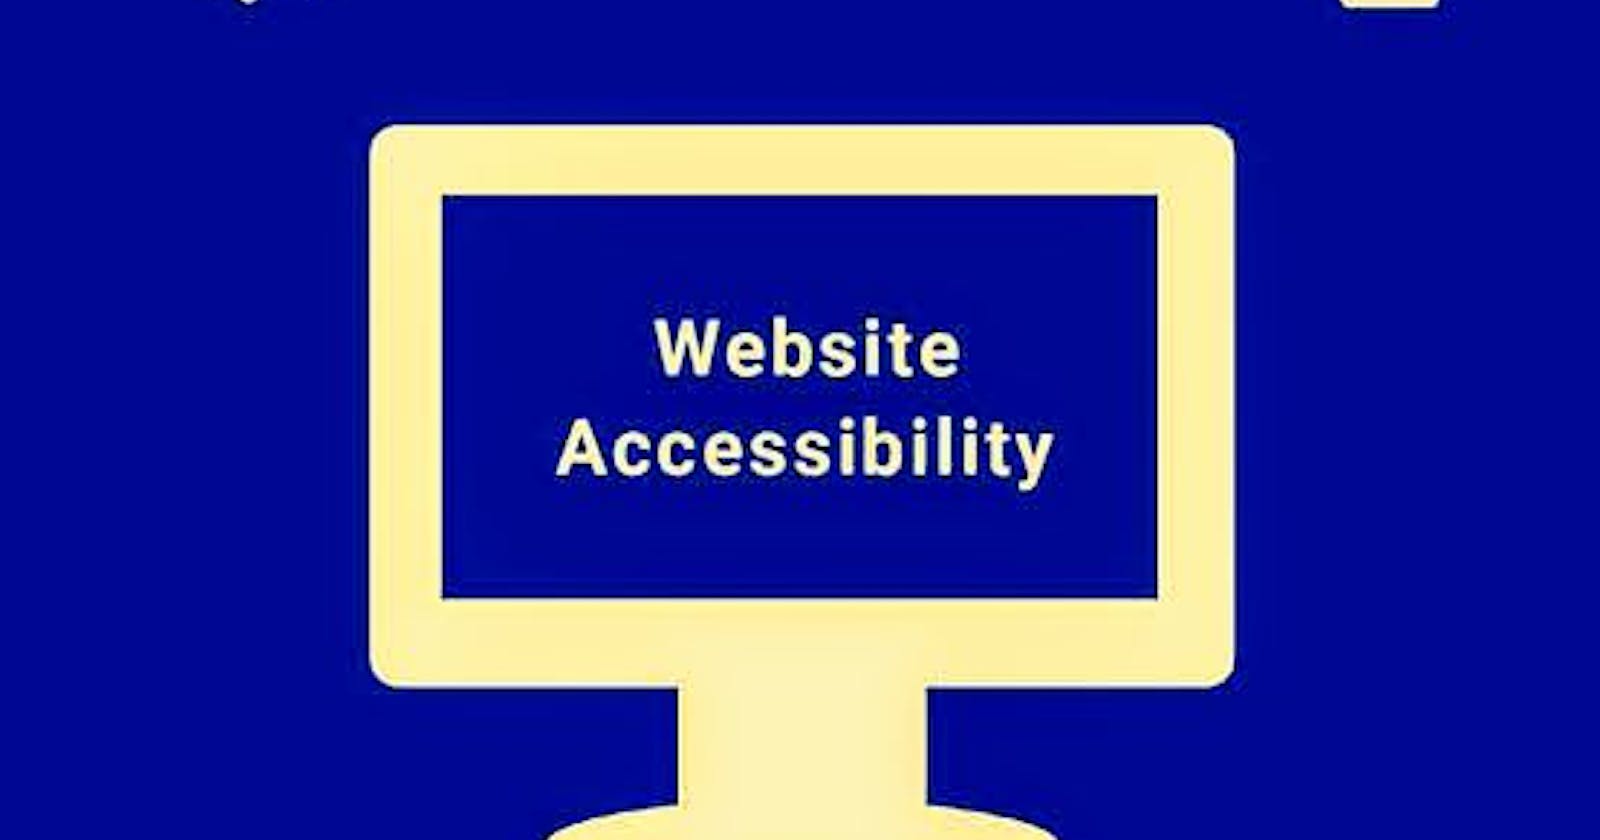 Website Accessibility Guidelines.